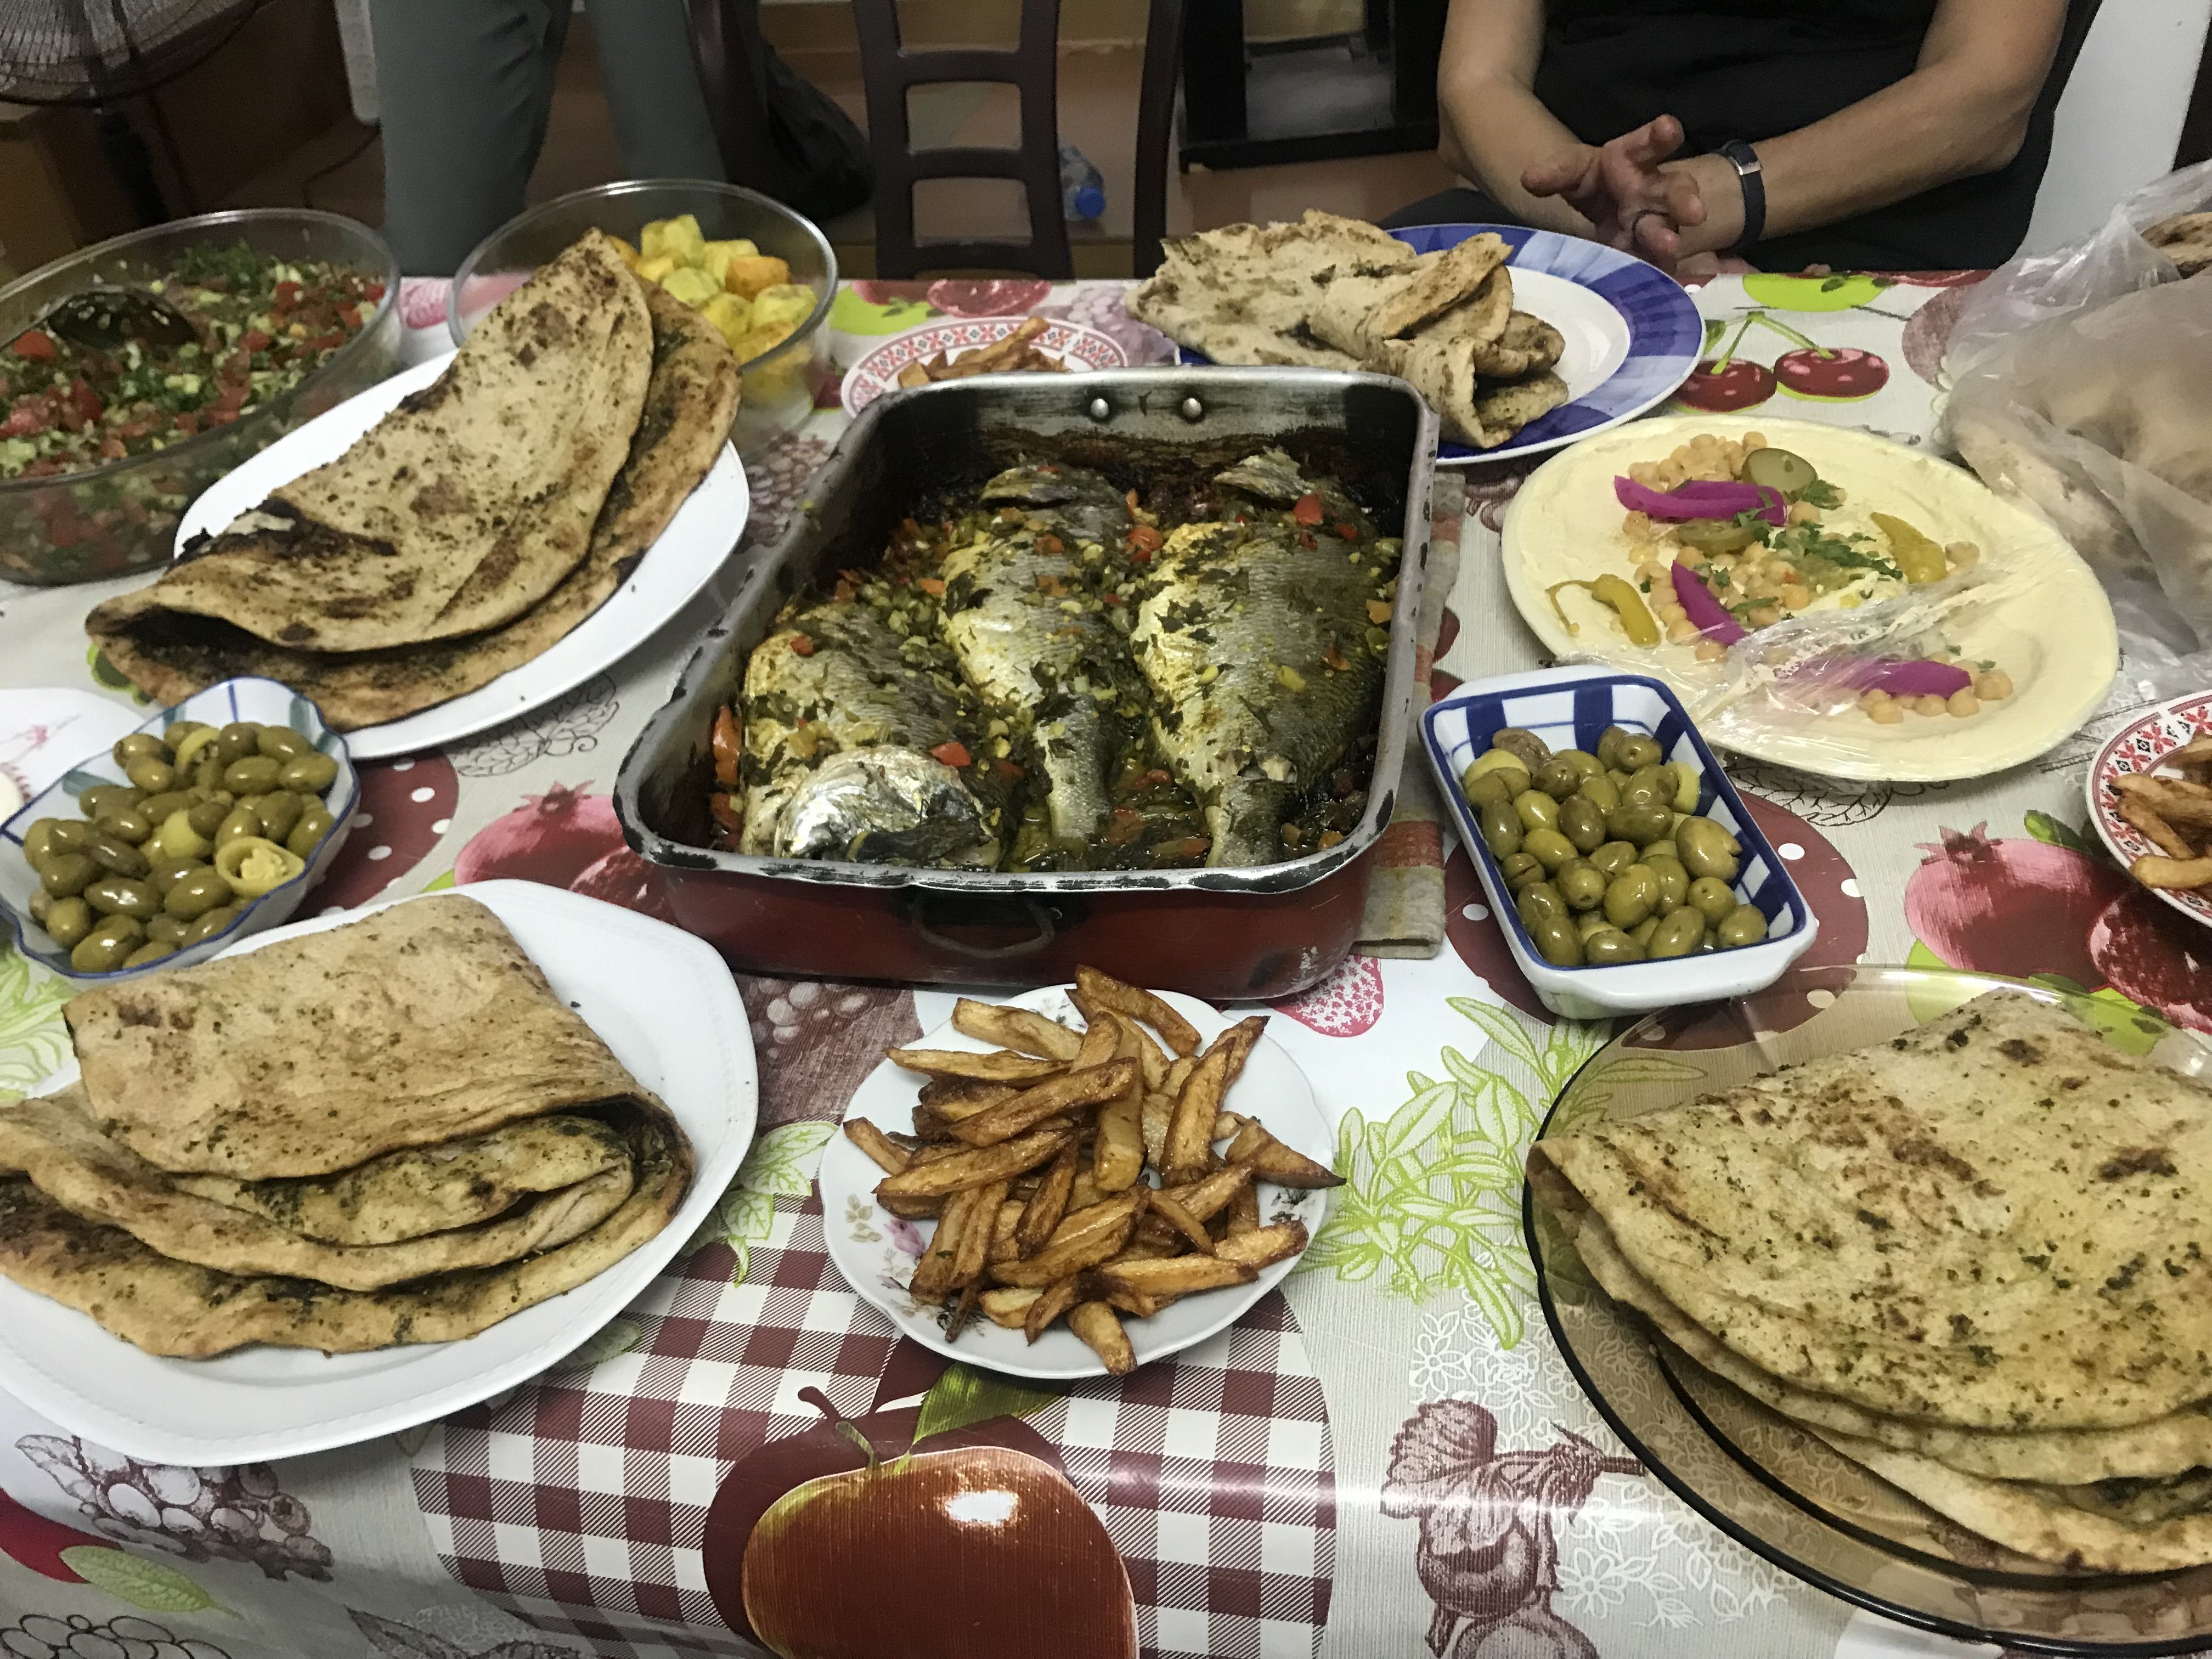 The lunch prepared by Doha upon learning of the reporter's visit to her farm. Image by Carly Graf. West Bank, 2019.